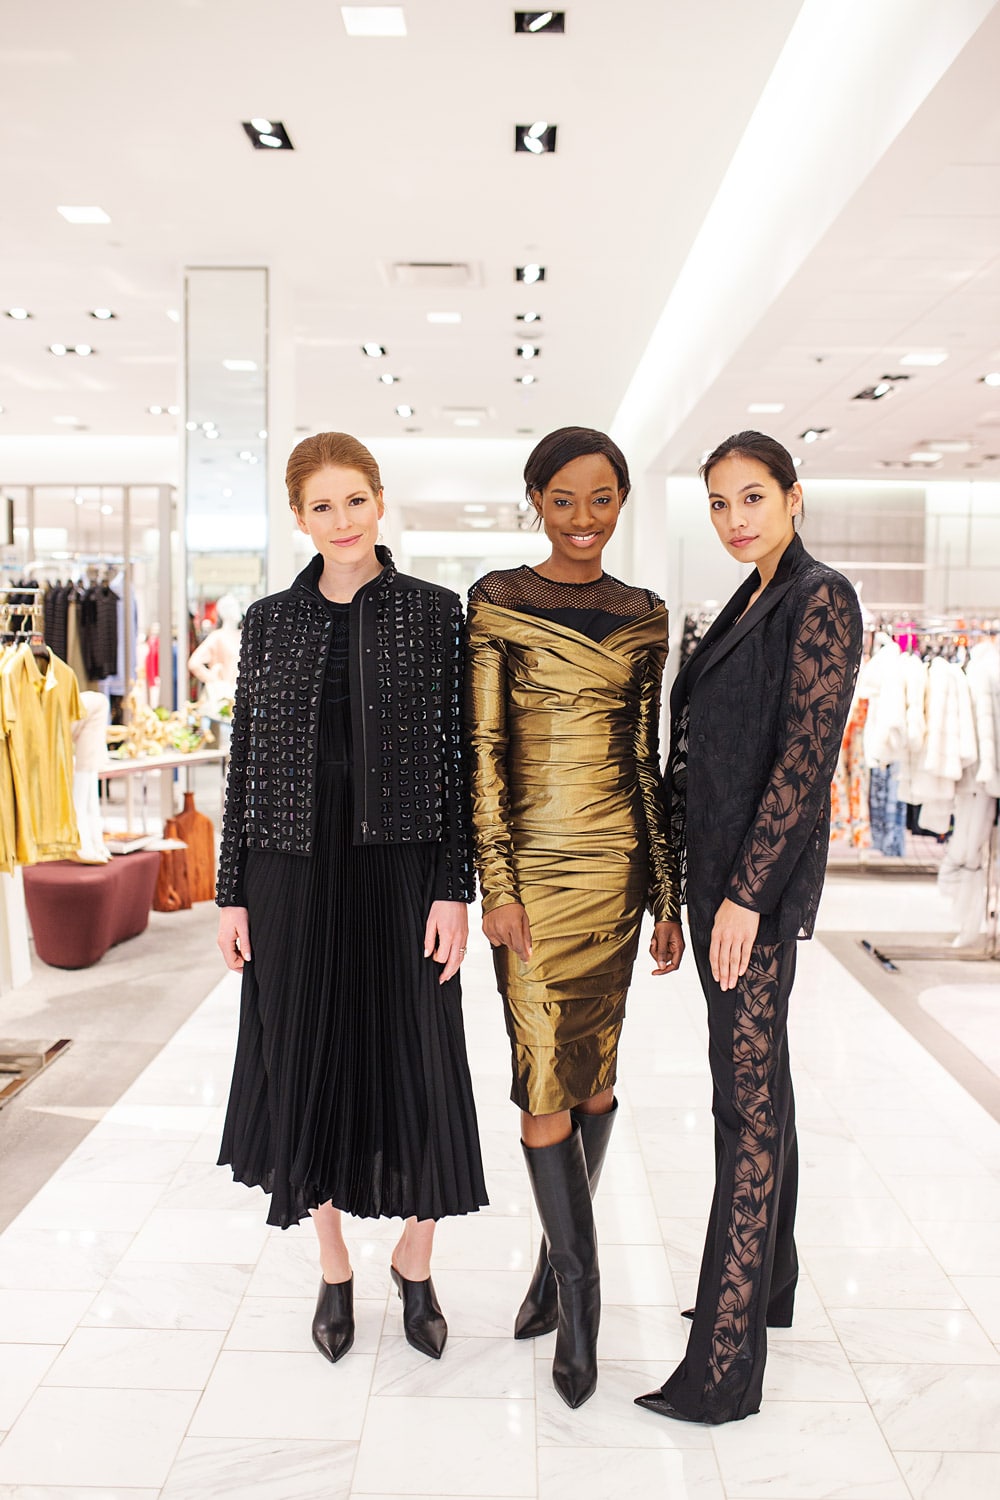 neiman marcus fort worth #whatsyourstylemood urban sophisticate